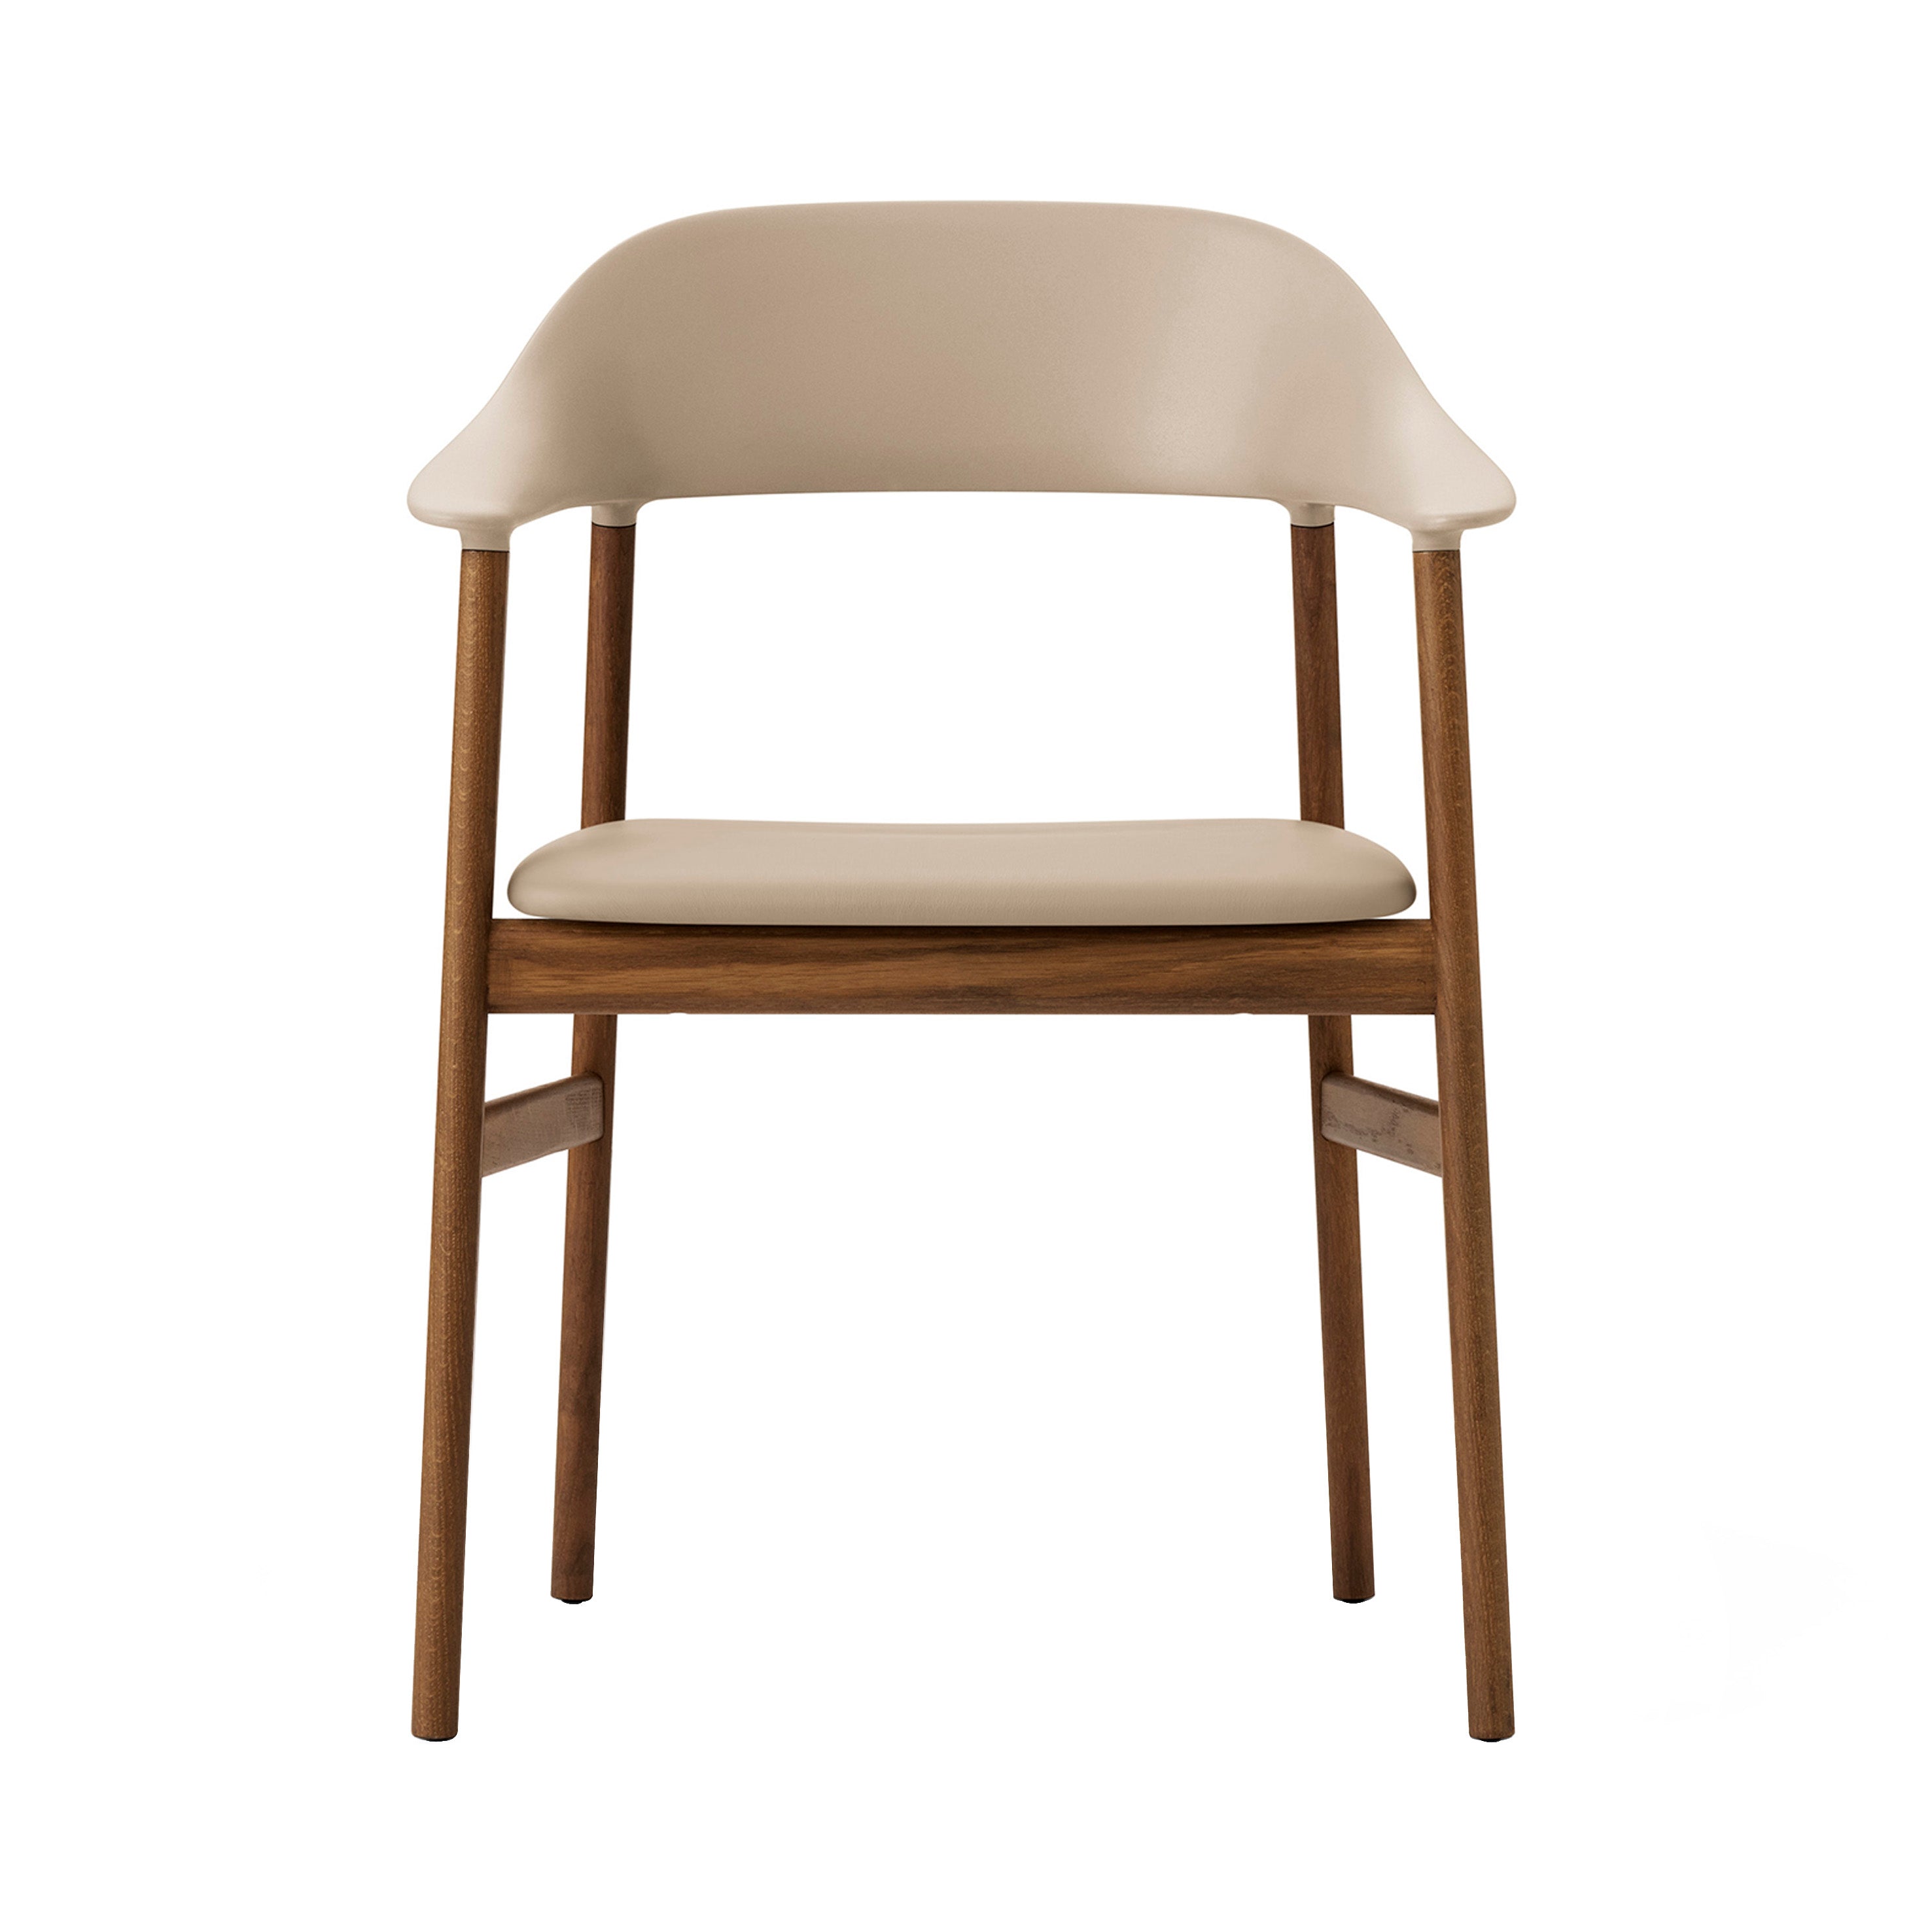 Herit Armchair: Upholstered + Smoked Oak + Sand + Spectrum Leather Sand